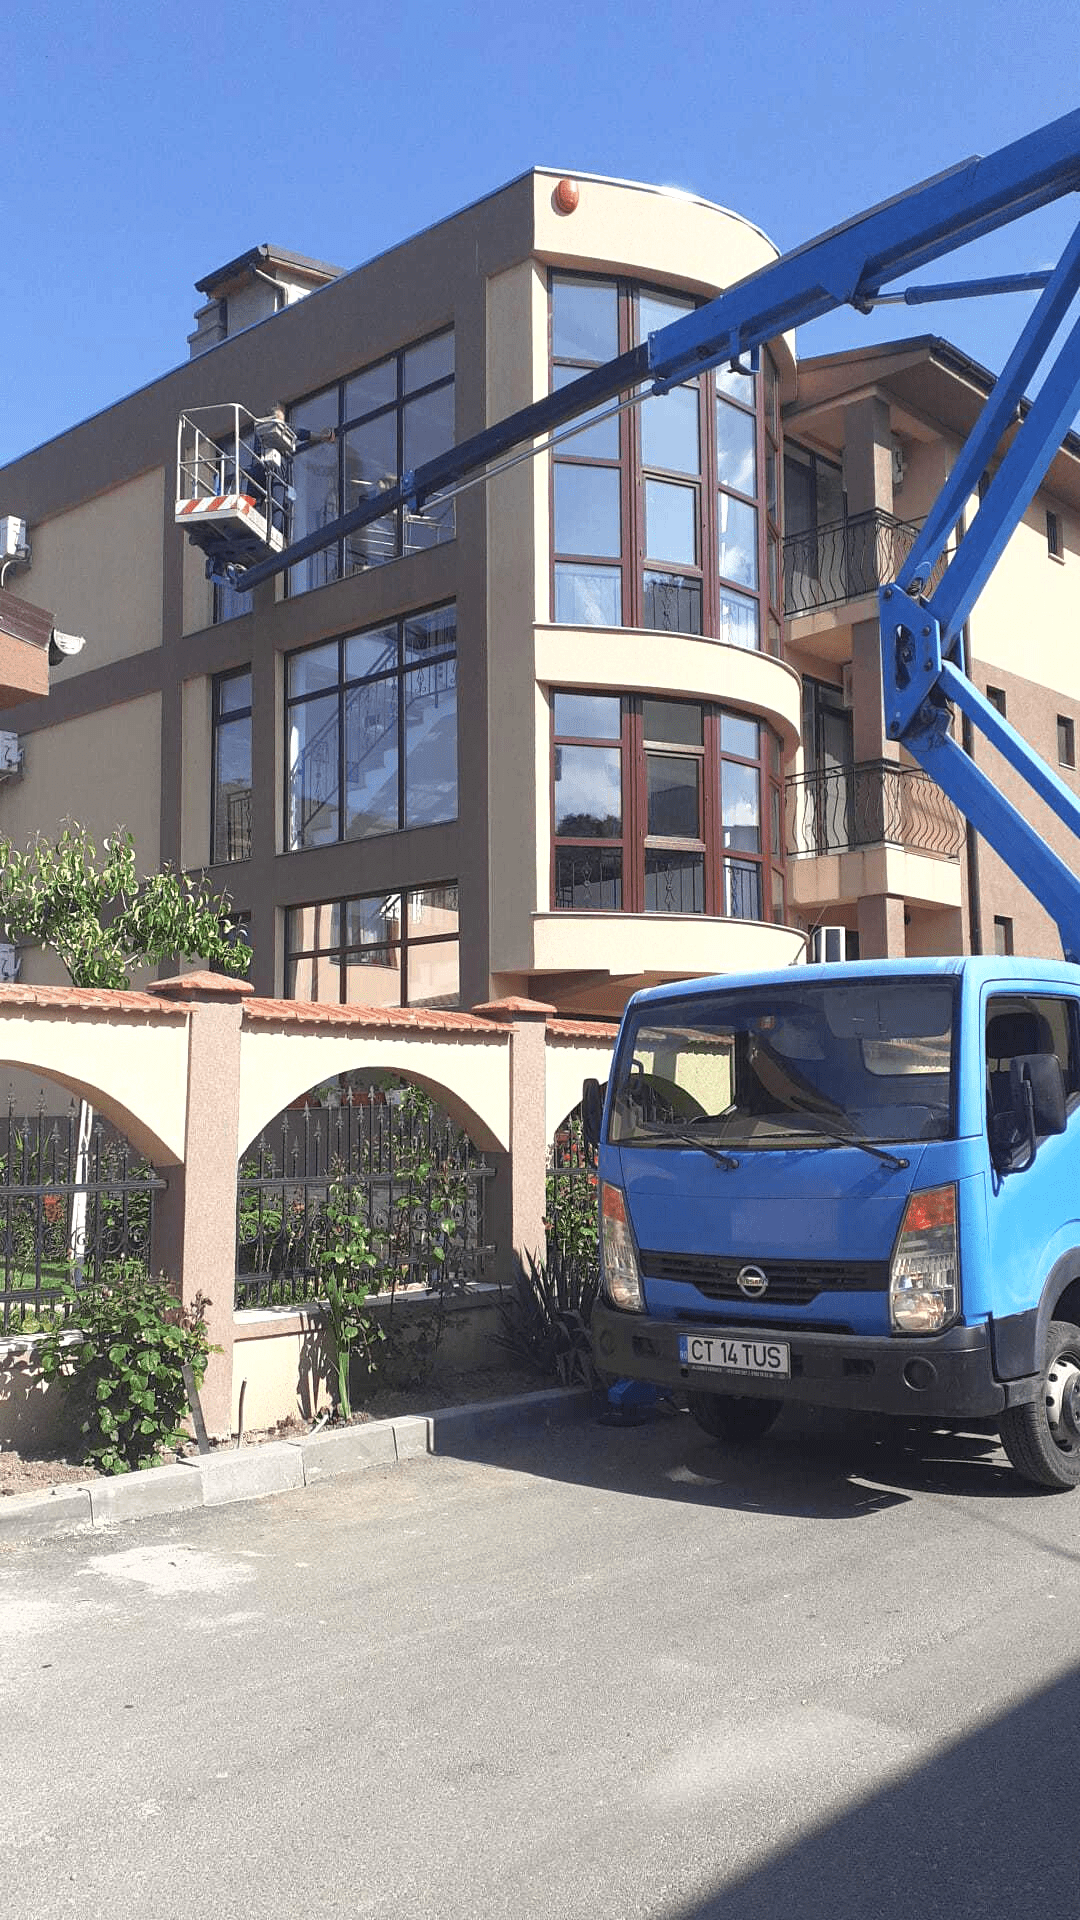 Window cleaning at heights using a truck-mounted boom lift